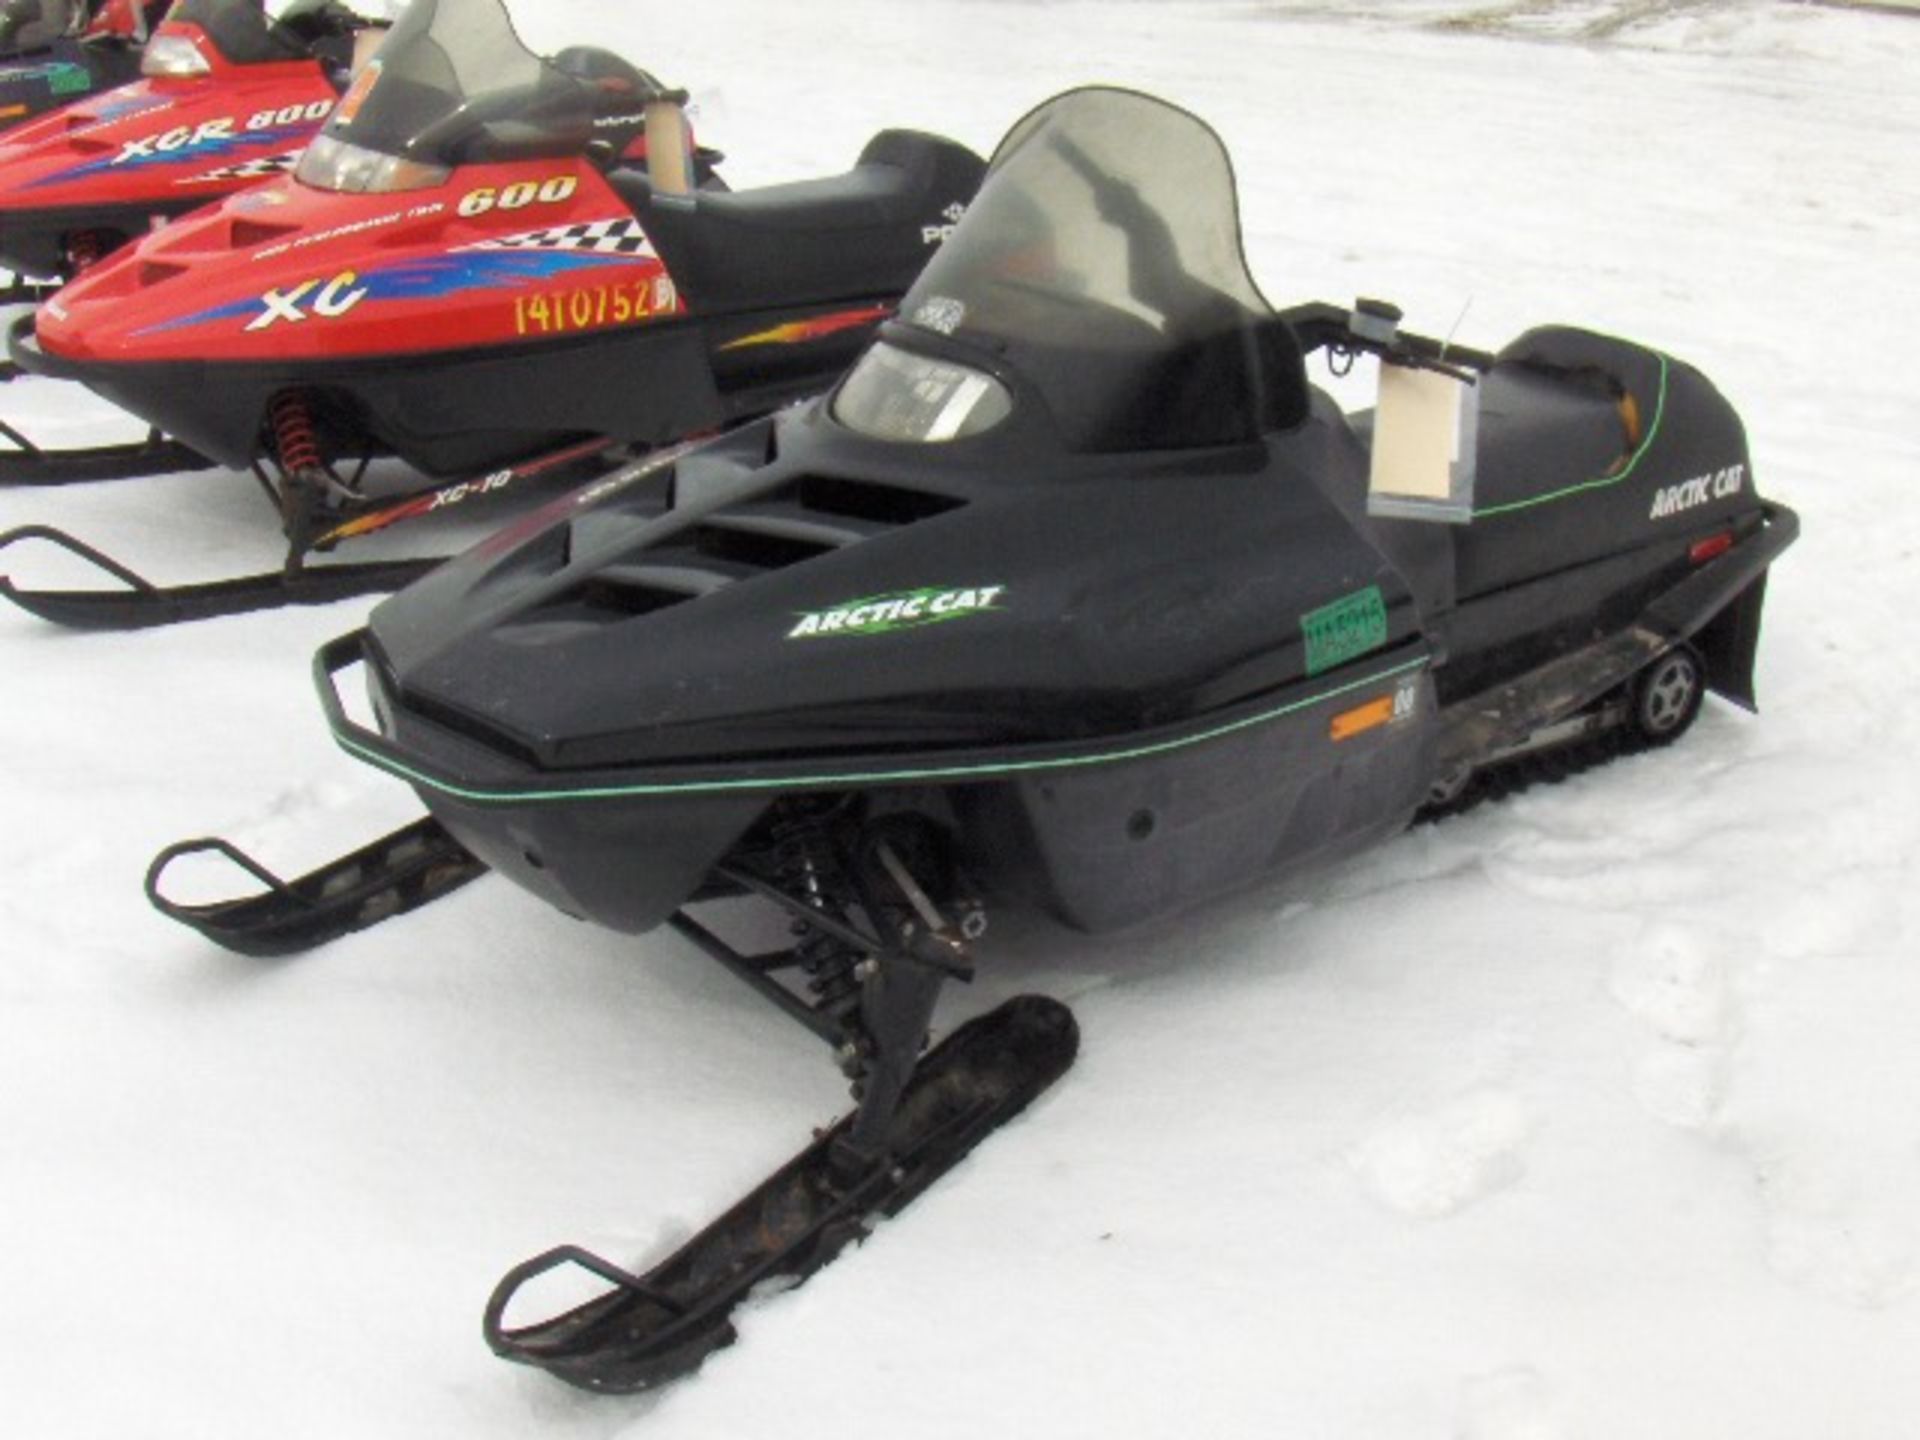 1995 ARCTIC CAT 580 EXT EFI 9516372 snowmobile, owner started at time of check-in, sold with a